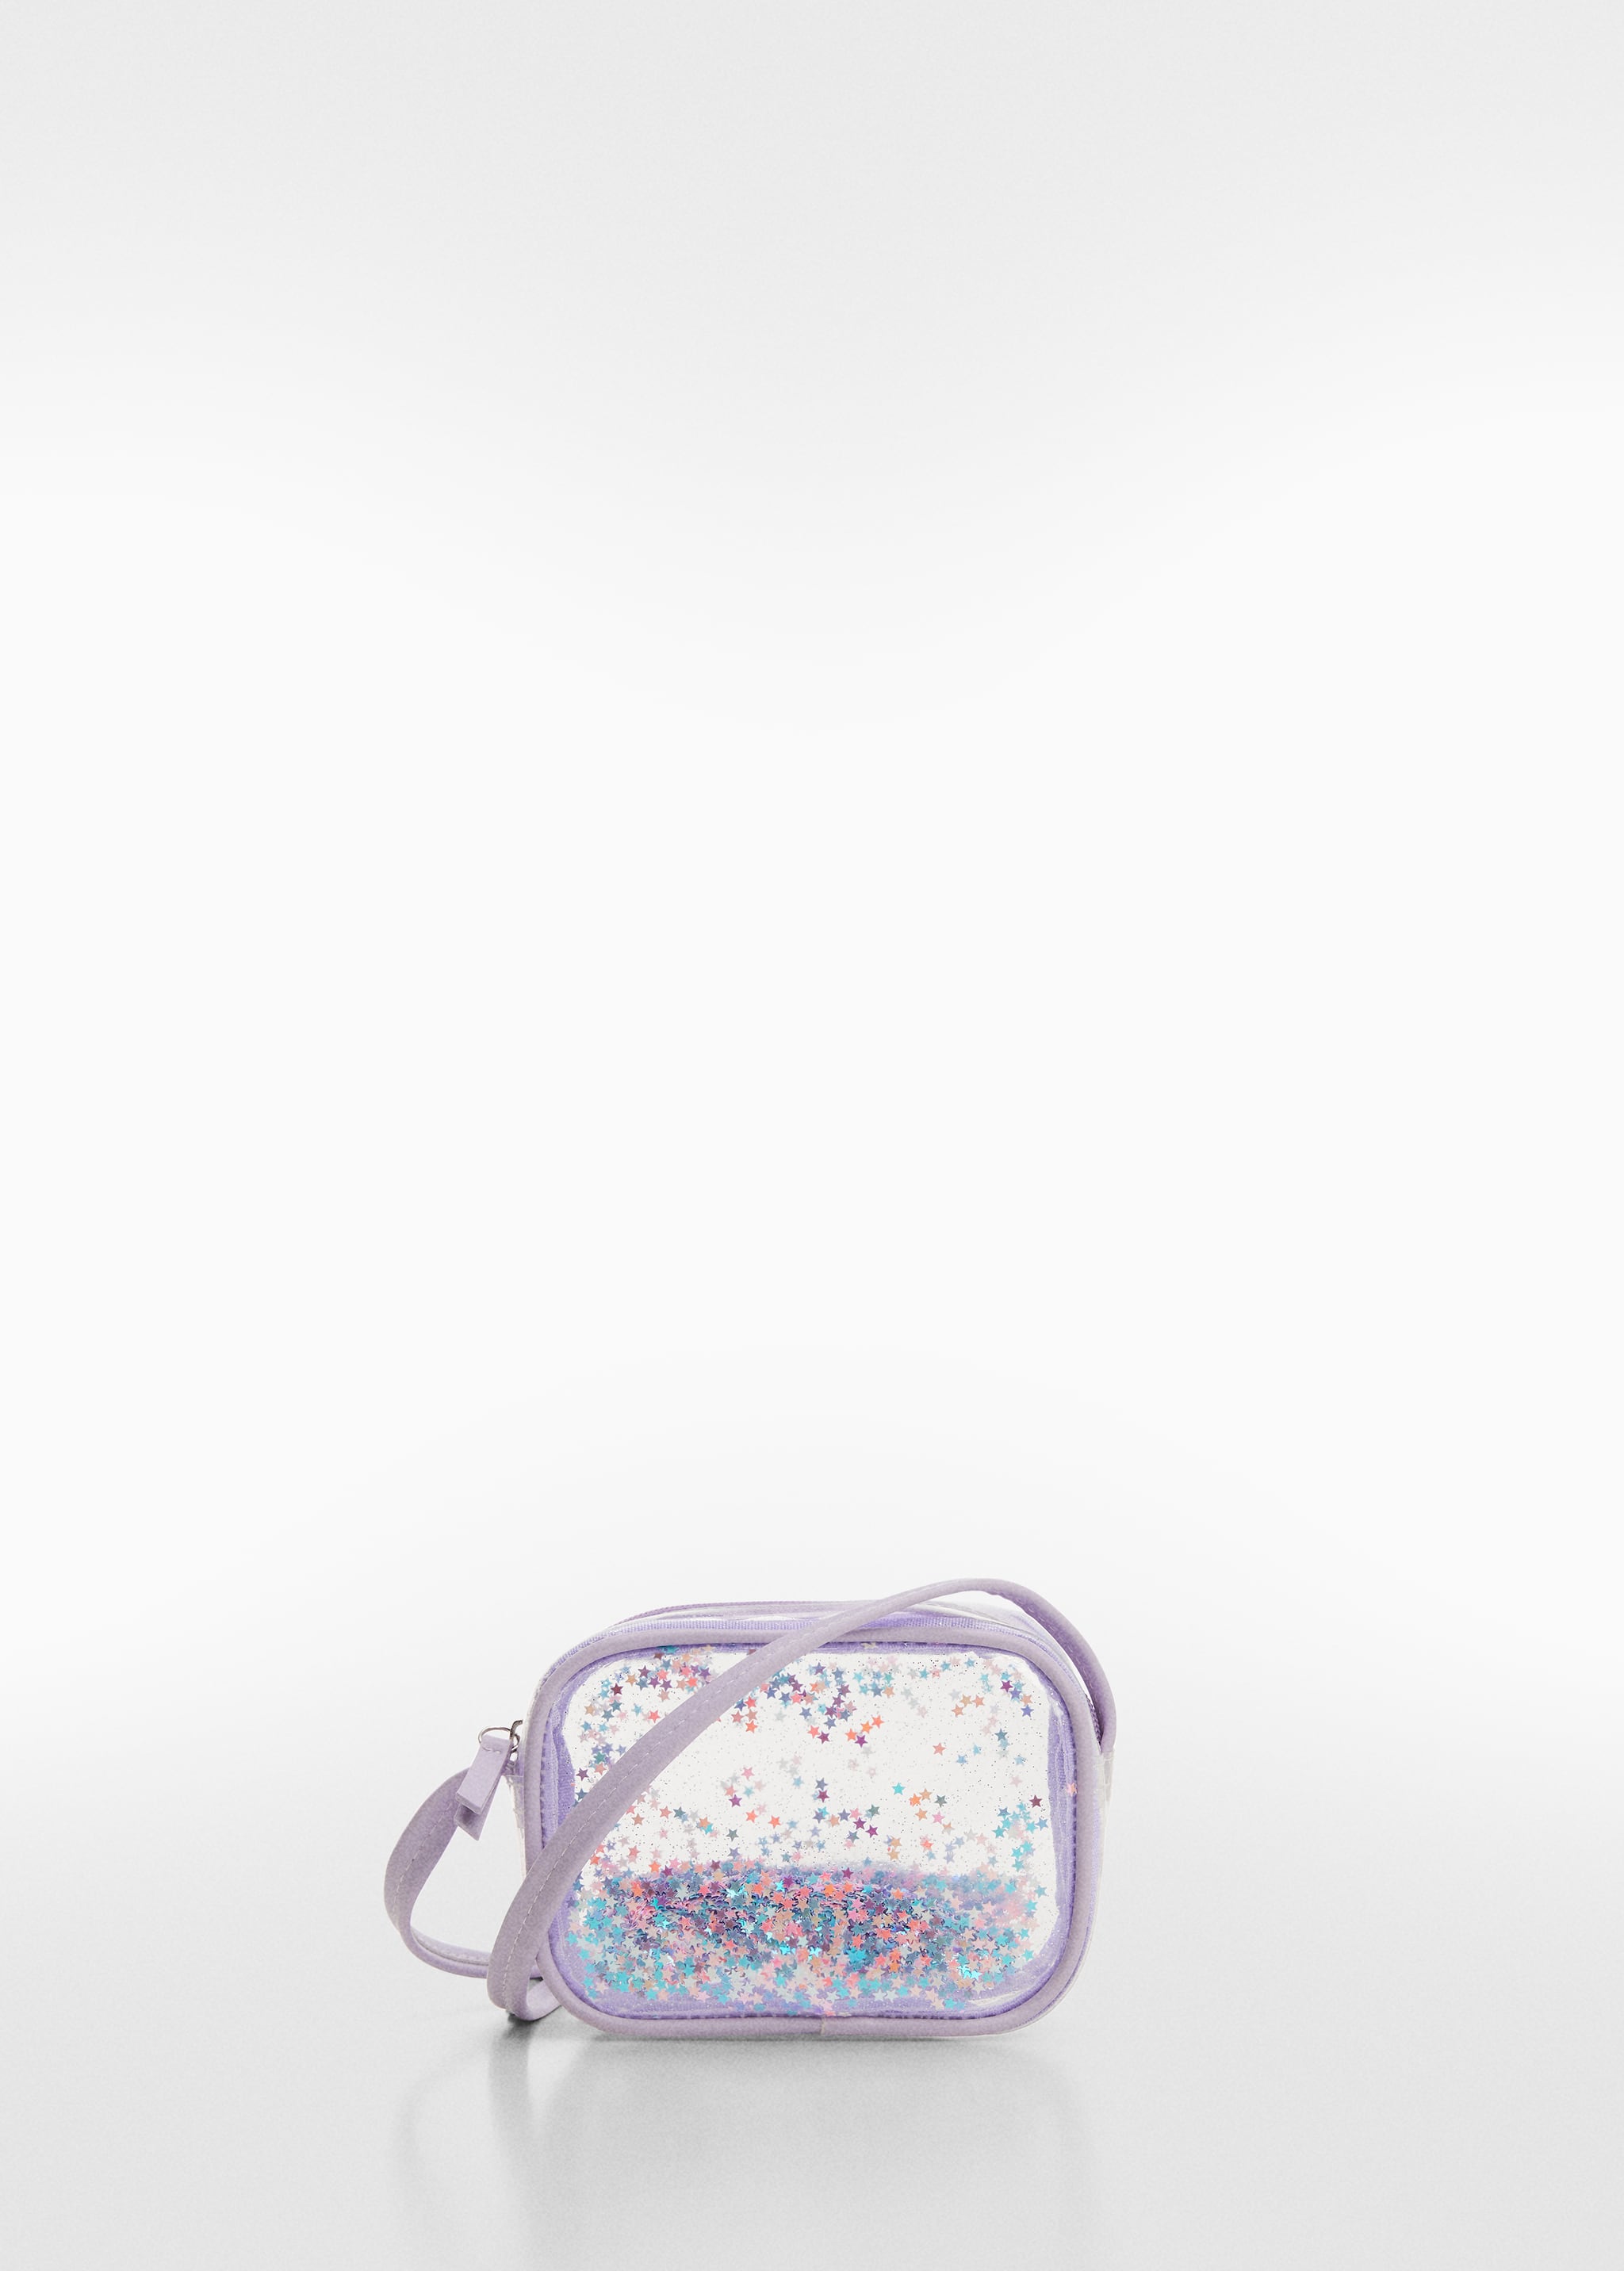 See-through bag - Article without model